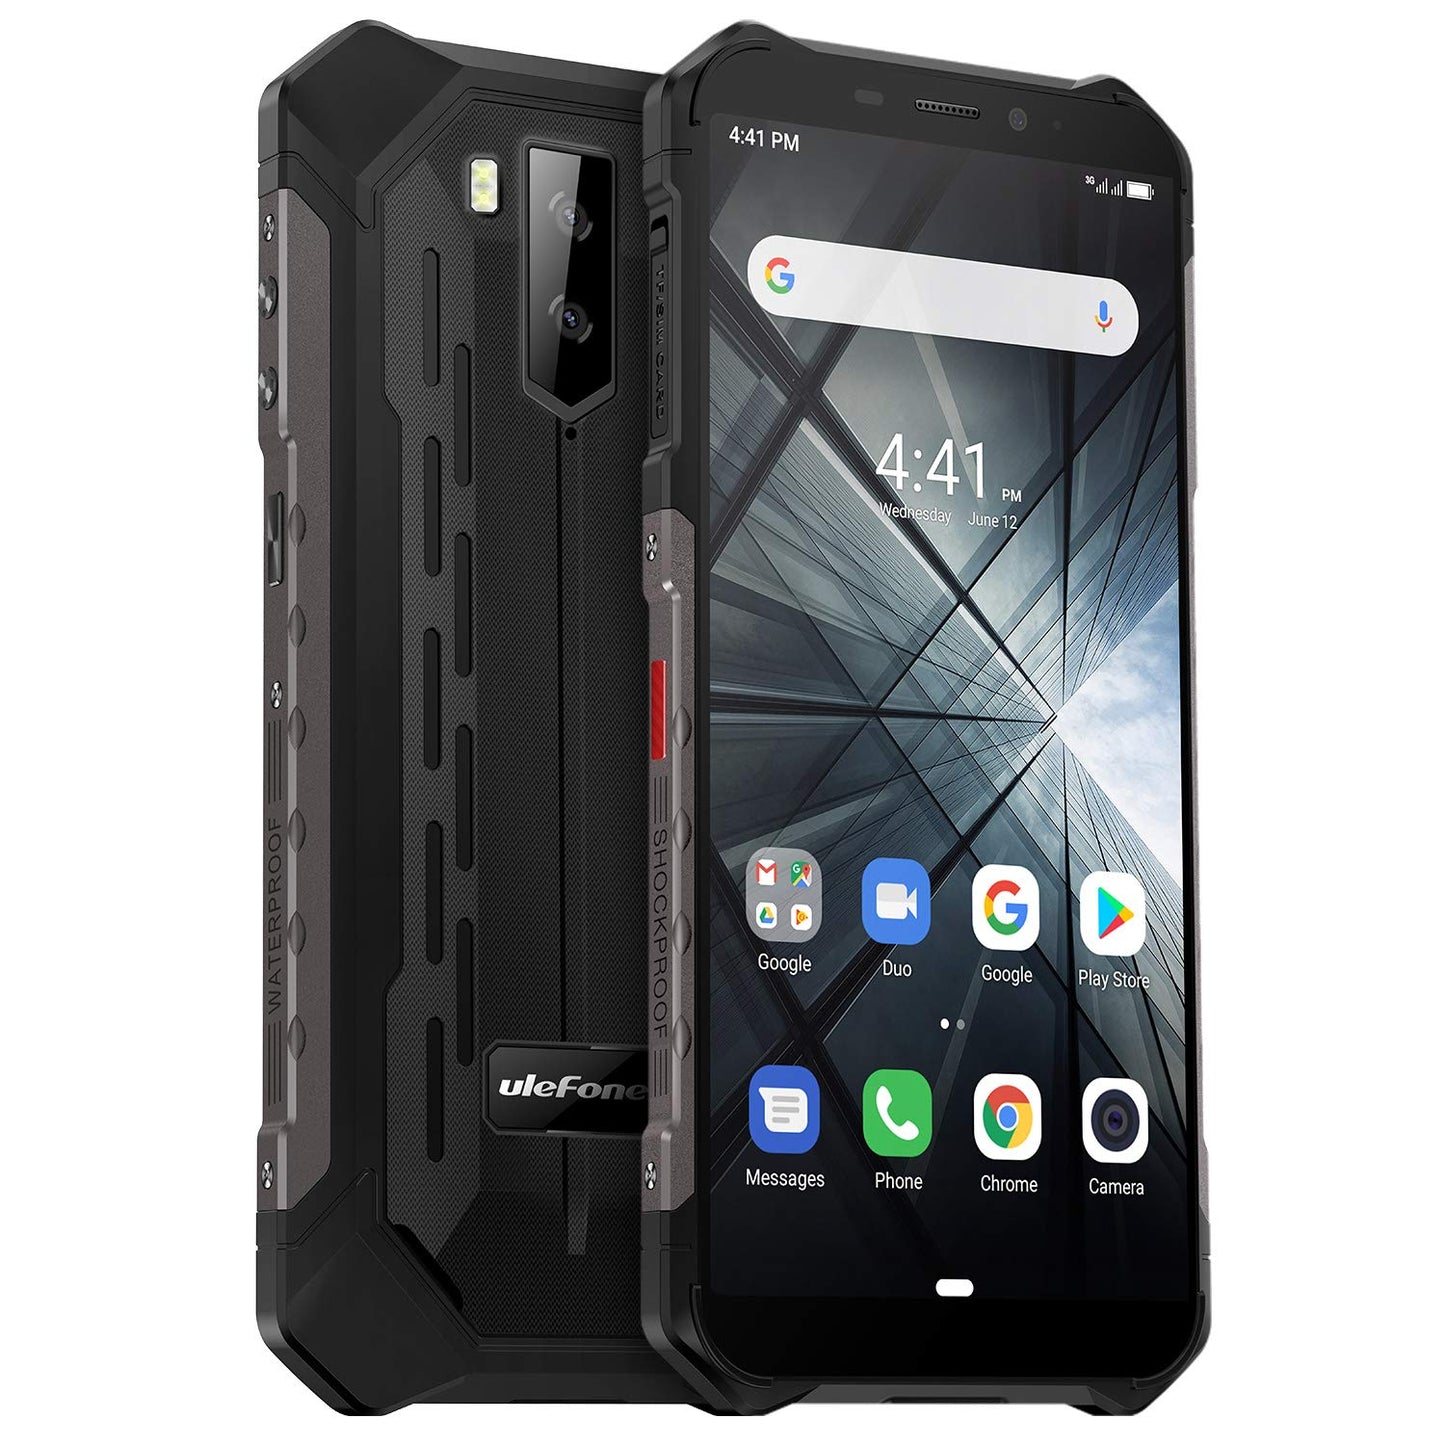 Rugged Cell Phones Unlocked, Ulefone Armor X3 Waterproof Unlocked Cell Phone, Global 3G Dual SIM Android 9.0 2GB+32GB 5.5 inches IPS Dsiplay 5000mAh Battery Dual Cameras Face ID Rugged Phones (Black)